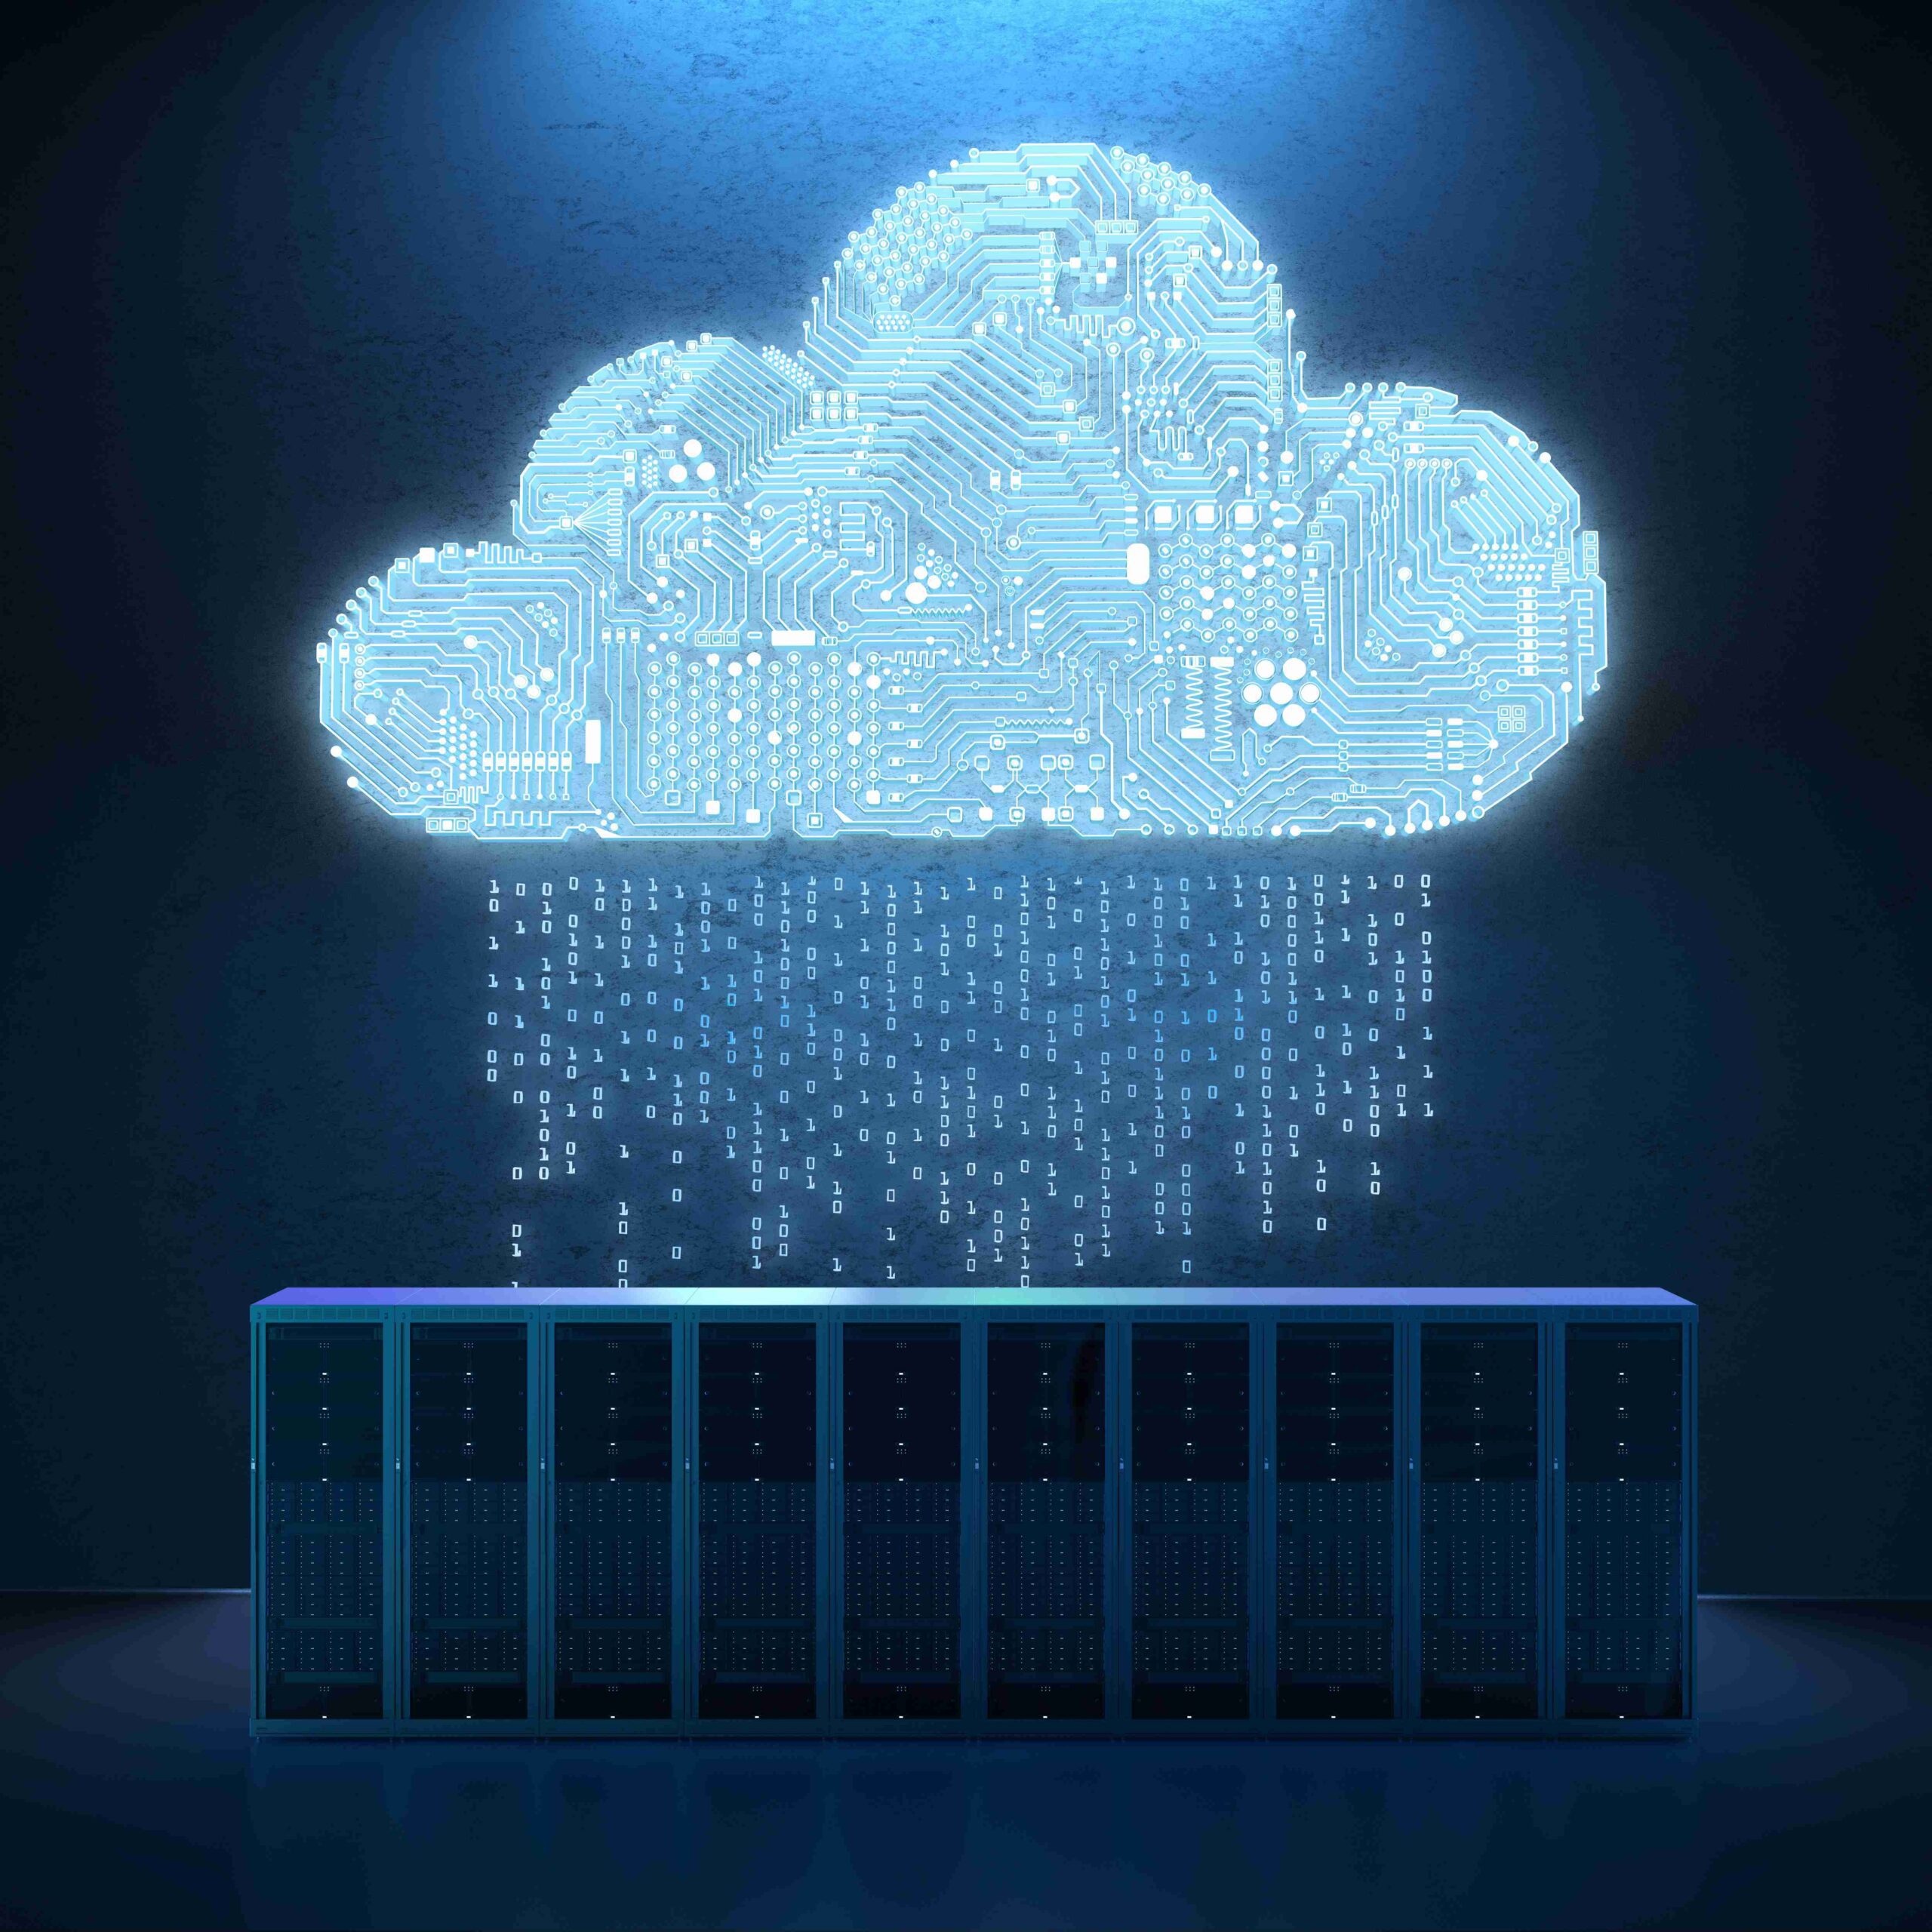 Reasons for, and Advantages of, the On-Premises Data Center and Private Cloud